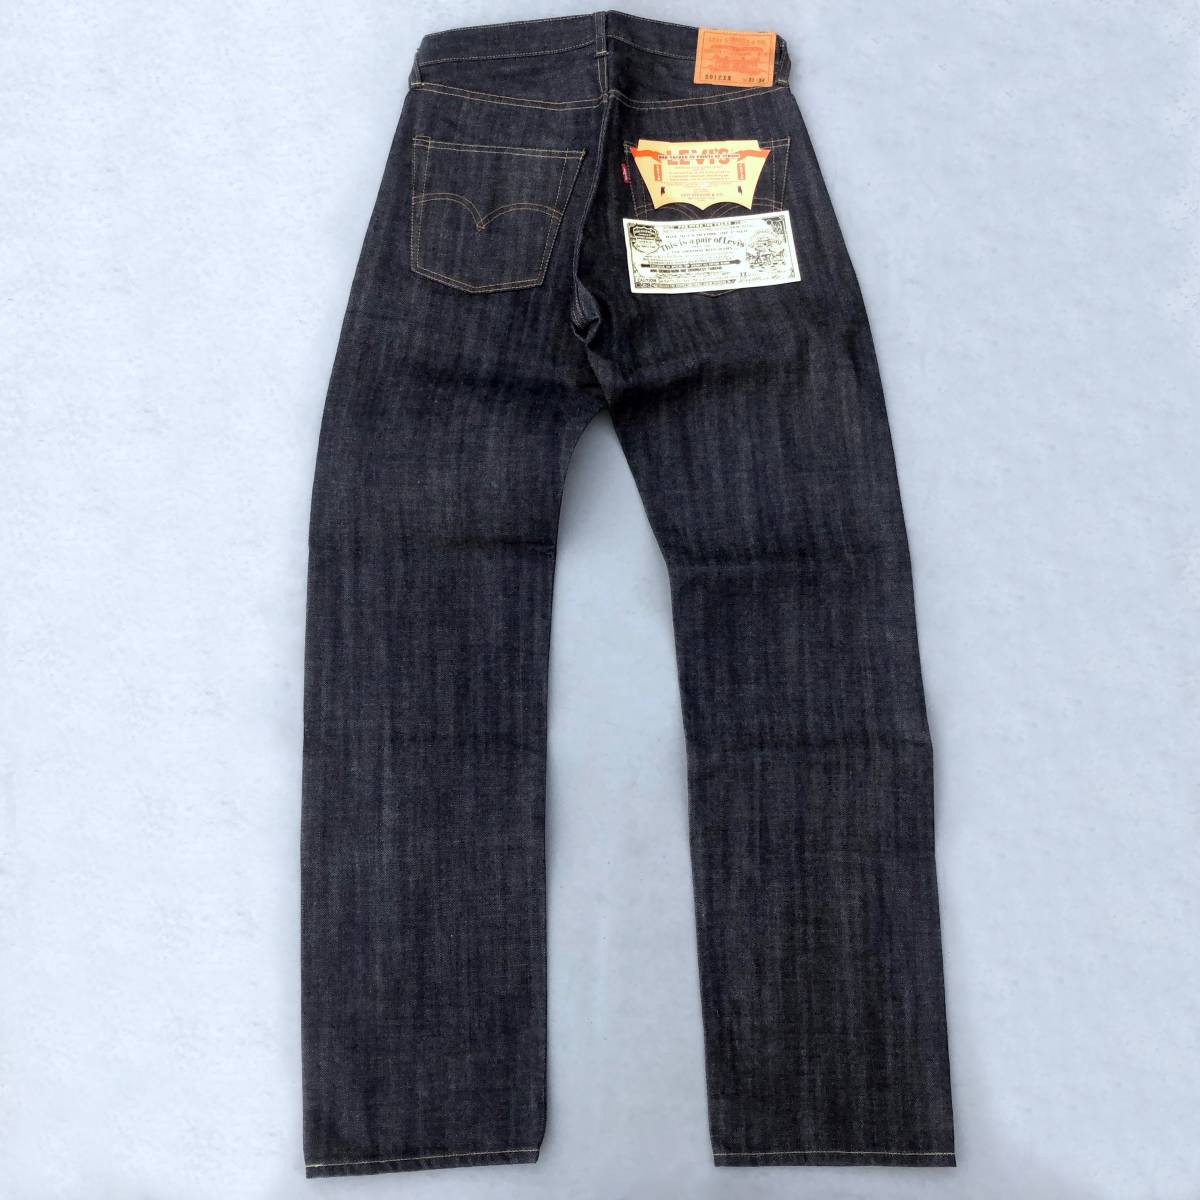 made in Japan 1954 year of model LEVI'S VINTAGE CLOTHING 501ZXX 